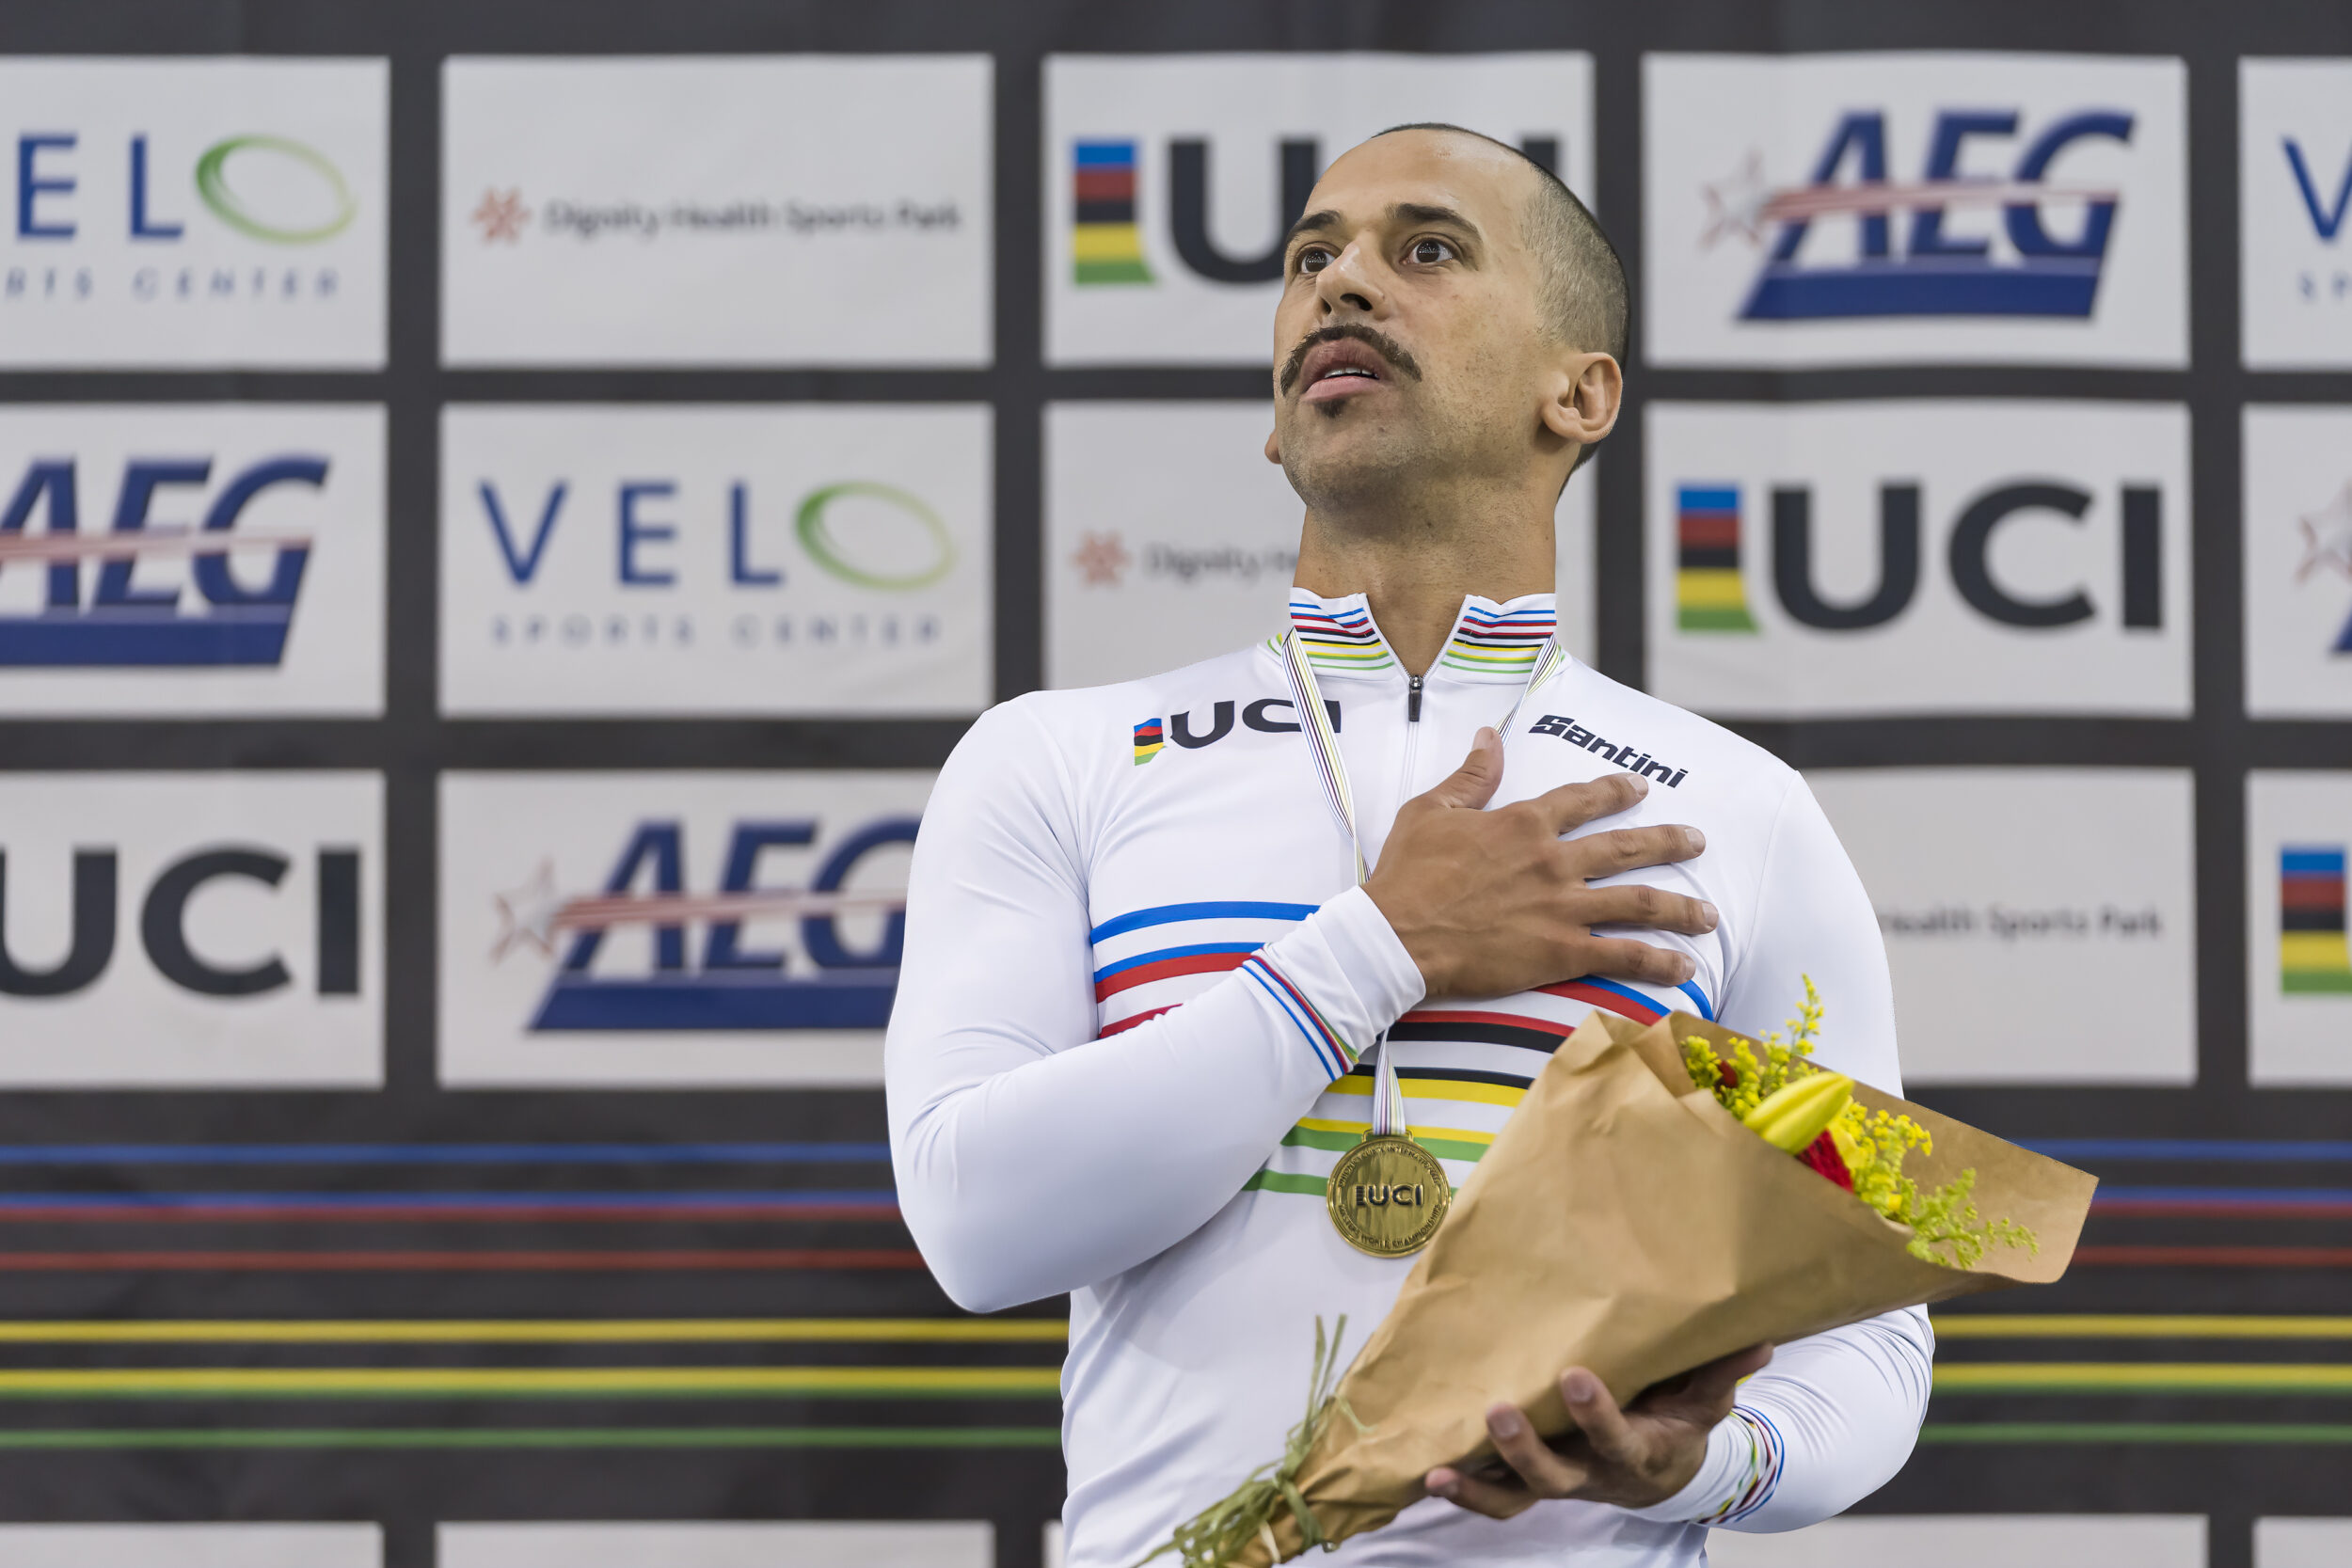 A man in a white cycling jersey and gold medal around his neck holds his right hand over his heart while clutching a bouquet of flowers in the other.